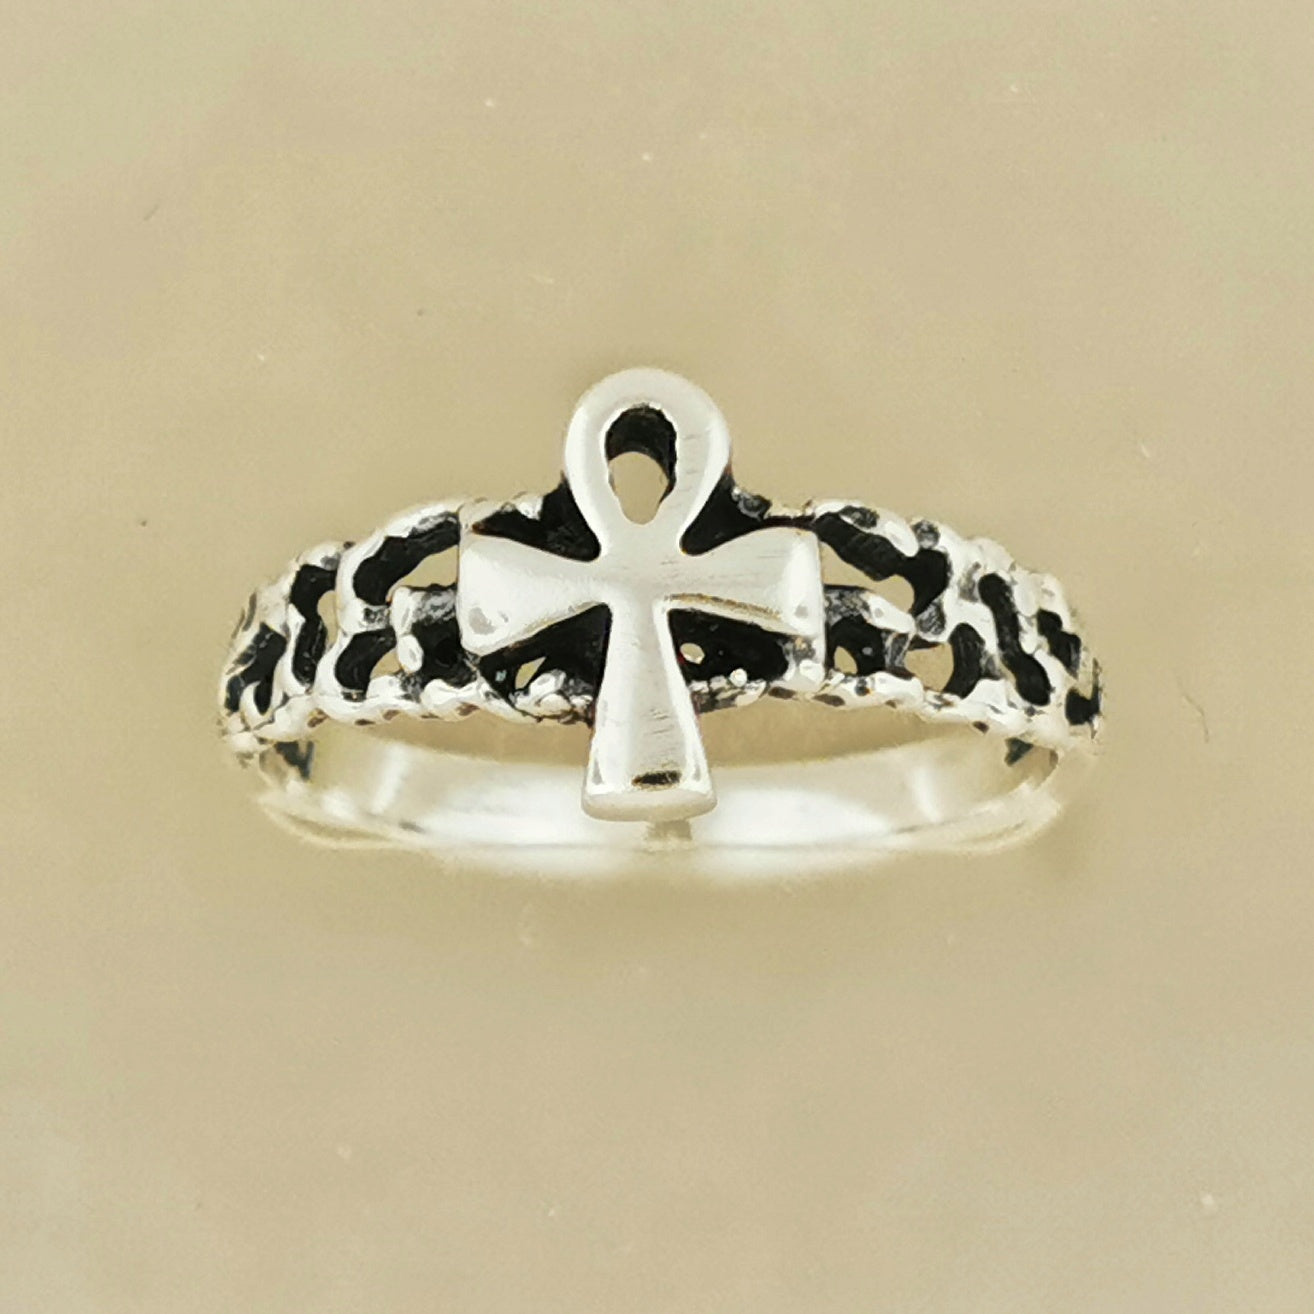 Small Ankh Ring in Sterling Silver, Sterling SIlver Ankh Ring, Silver Ankh Ring, Egypstian Key Ring, Ancient Egyptian Ring, Silver Ankh Ring, Egyptian Ankh Ring, Silver Egyptian Ring, .925 Egyptian Ring, Eternal Life Ring, Silver Egyptian Jewellery, Silver Egyptian Jewelry, Silver Gothic Jewelry, Silver Gothic Jewellery